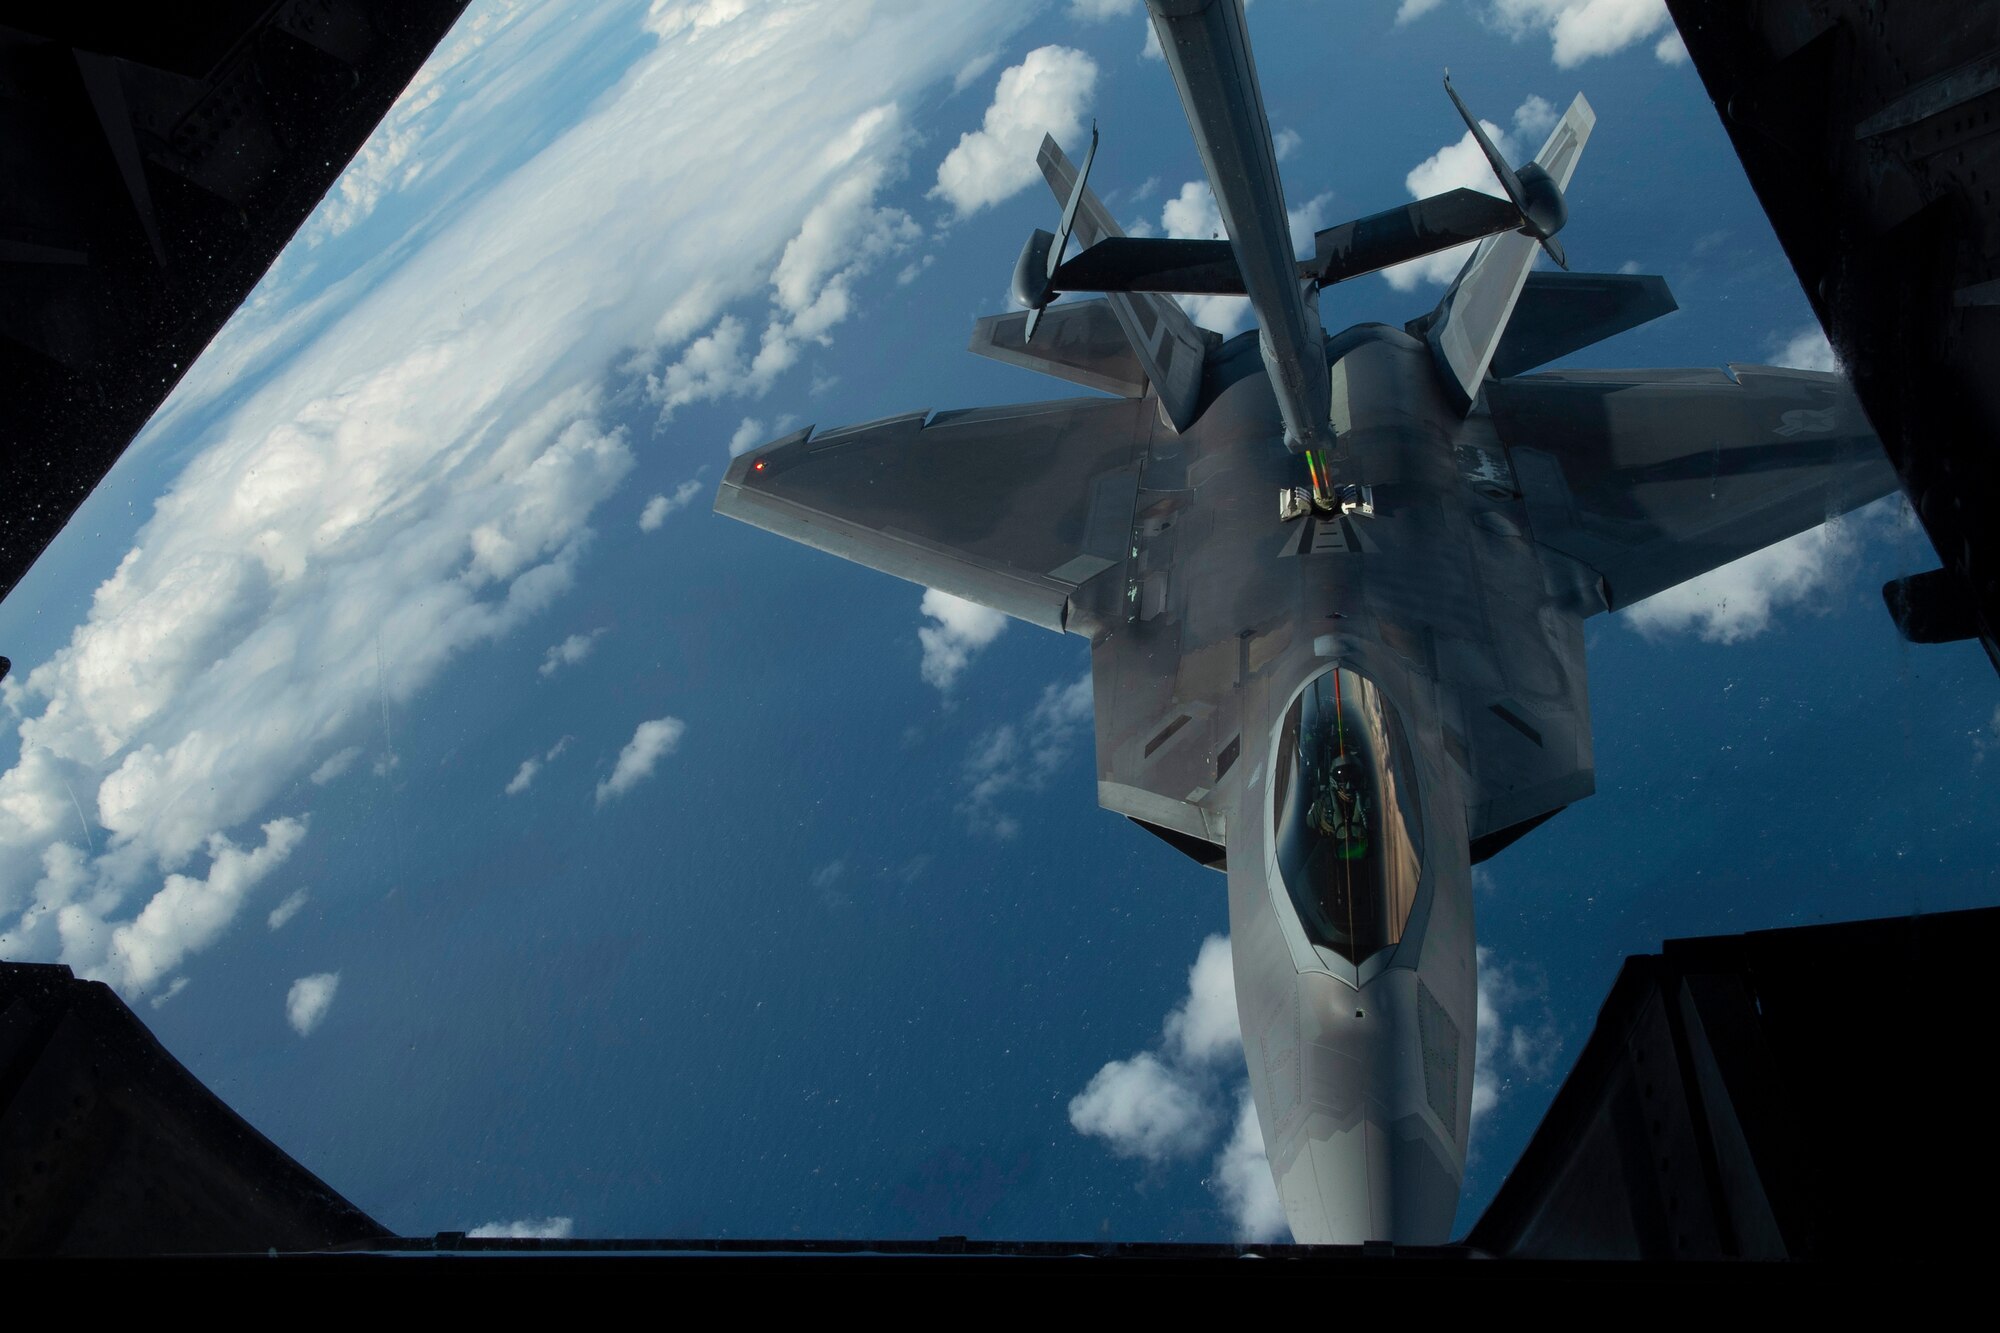 A U.S. Air Force F-22 Raptor is refueled July 14, over the Pacific Ocean near the coast of Brisbane, Australia, in support of Exercise Talisman Sabre 19.